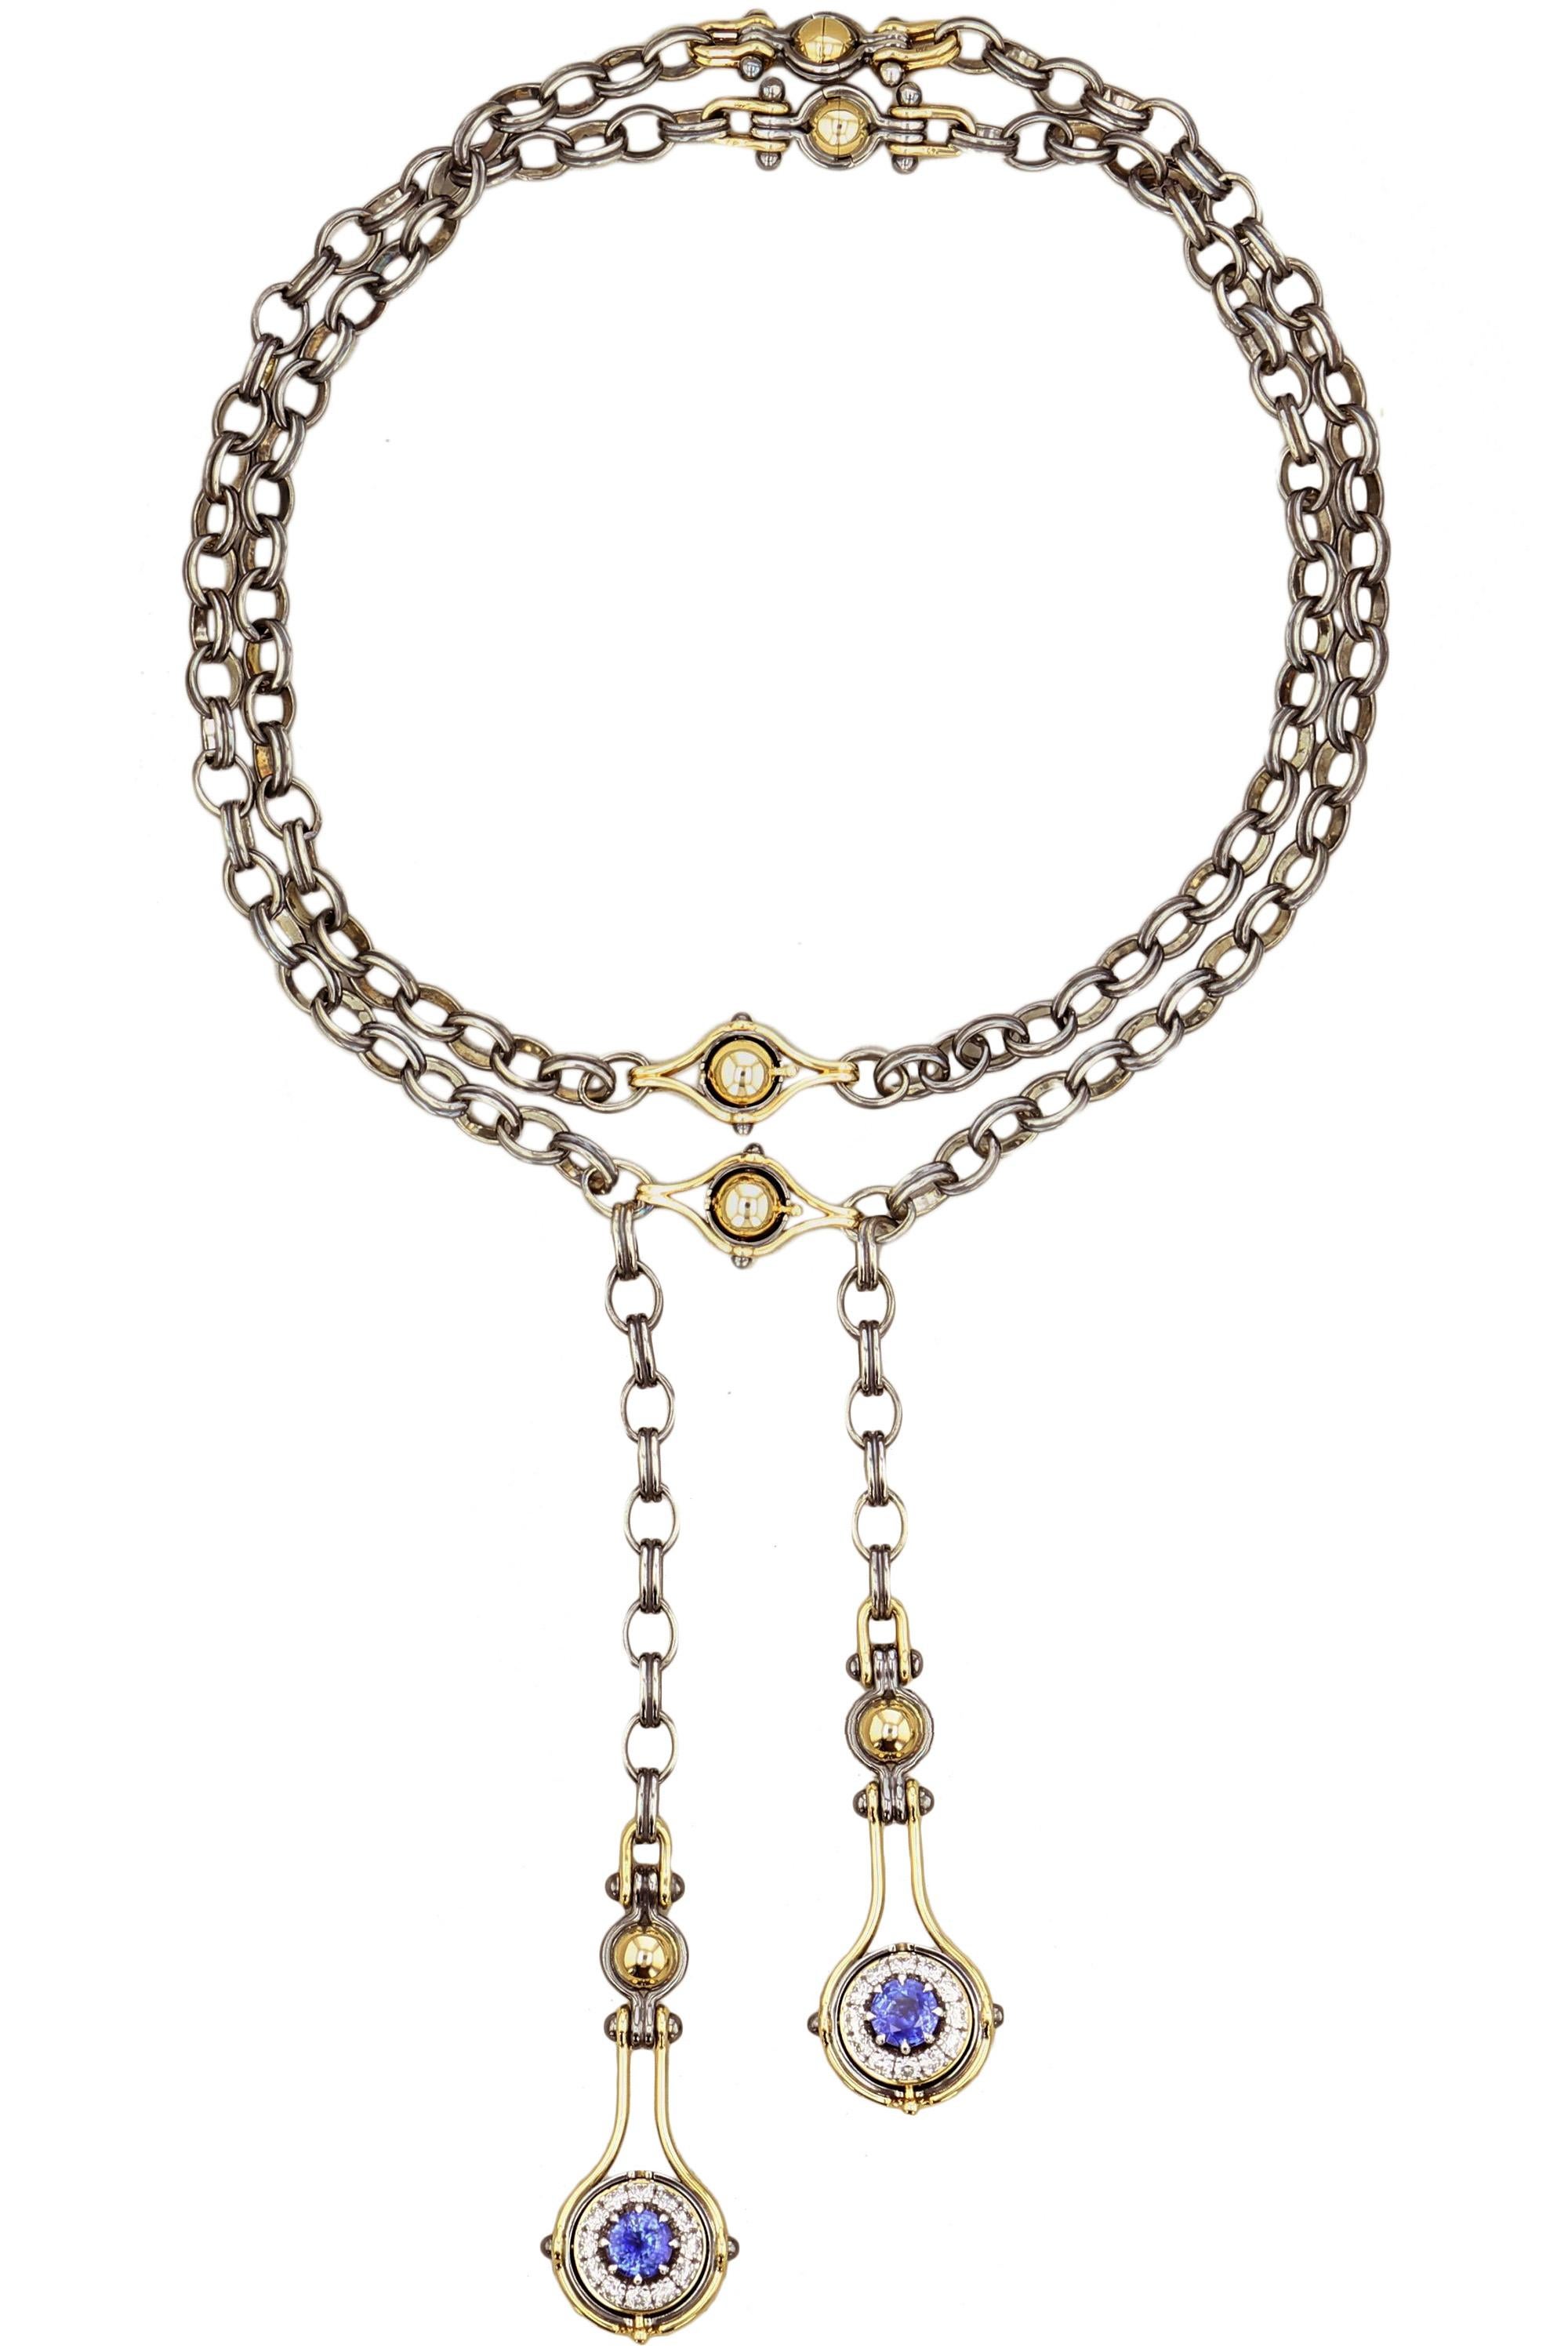 Adjustable necklace in yellow gold and distressed silver. Rotating spheres revealing a sapphire surrounded by diamonds.

Distressed silver chain with two clasps.

Details:
Central Sapphires : 3.31 cts
48 Diamonds :  2 cts 
18k Yellow Gold : 49